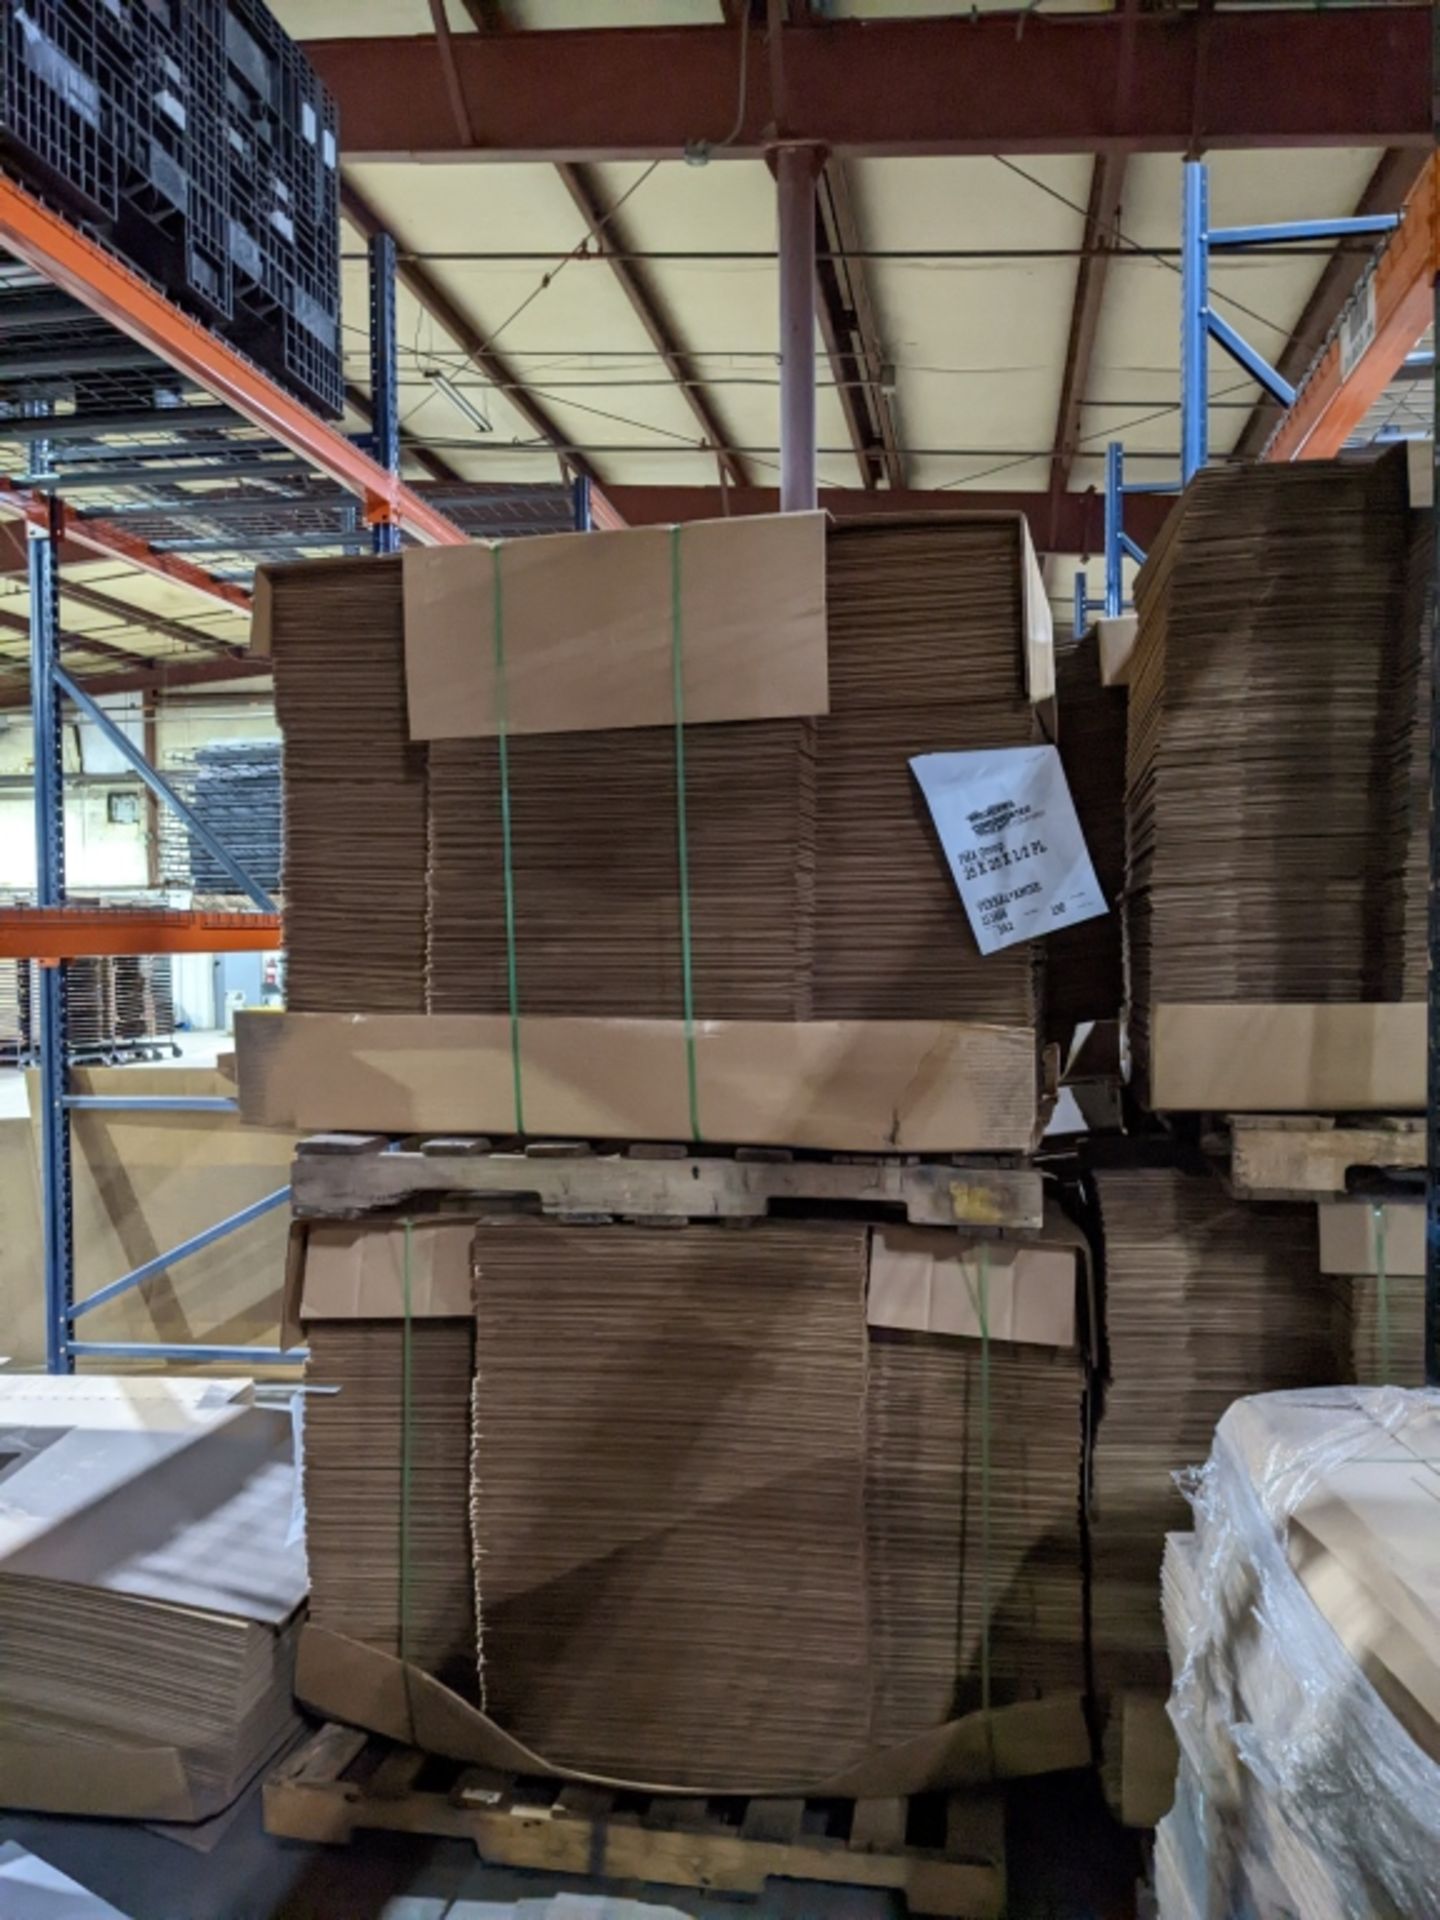 Michiana Corrugated Products Co. Shipping Boxes. - Image 3 of 5